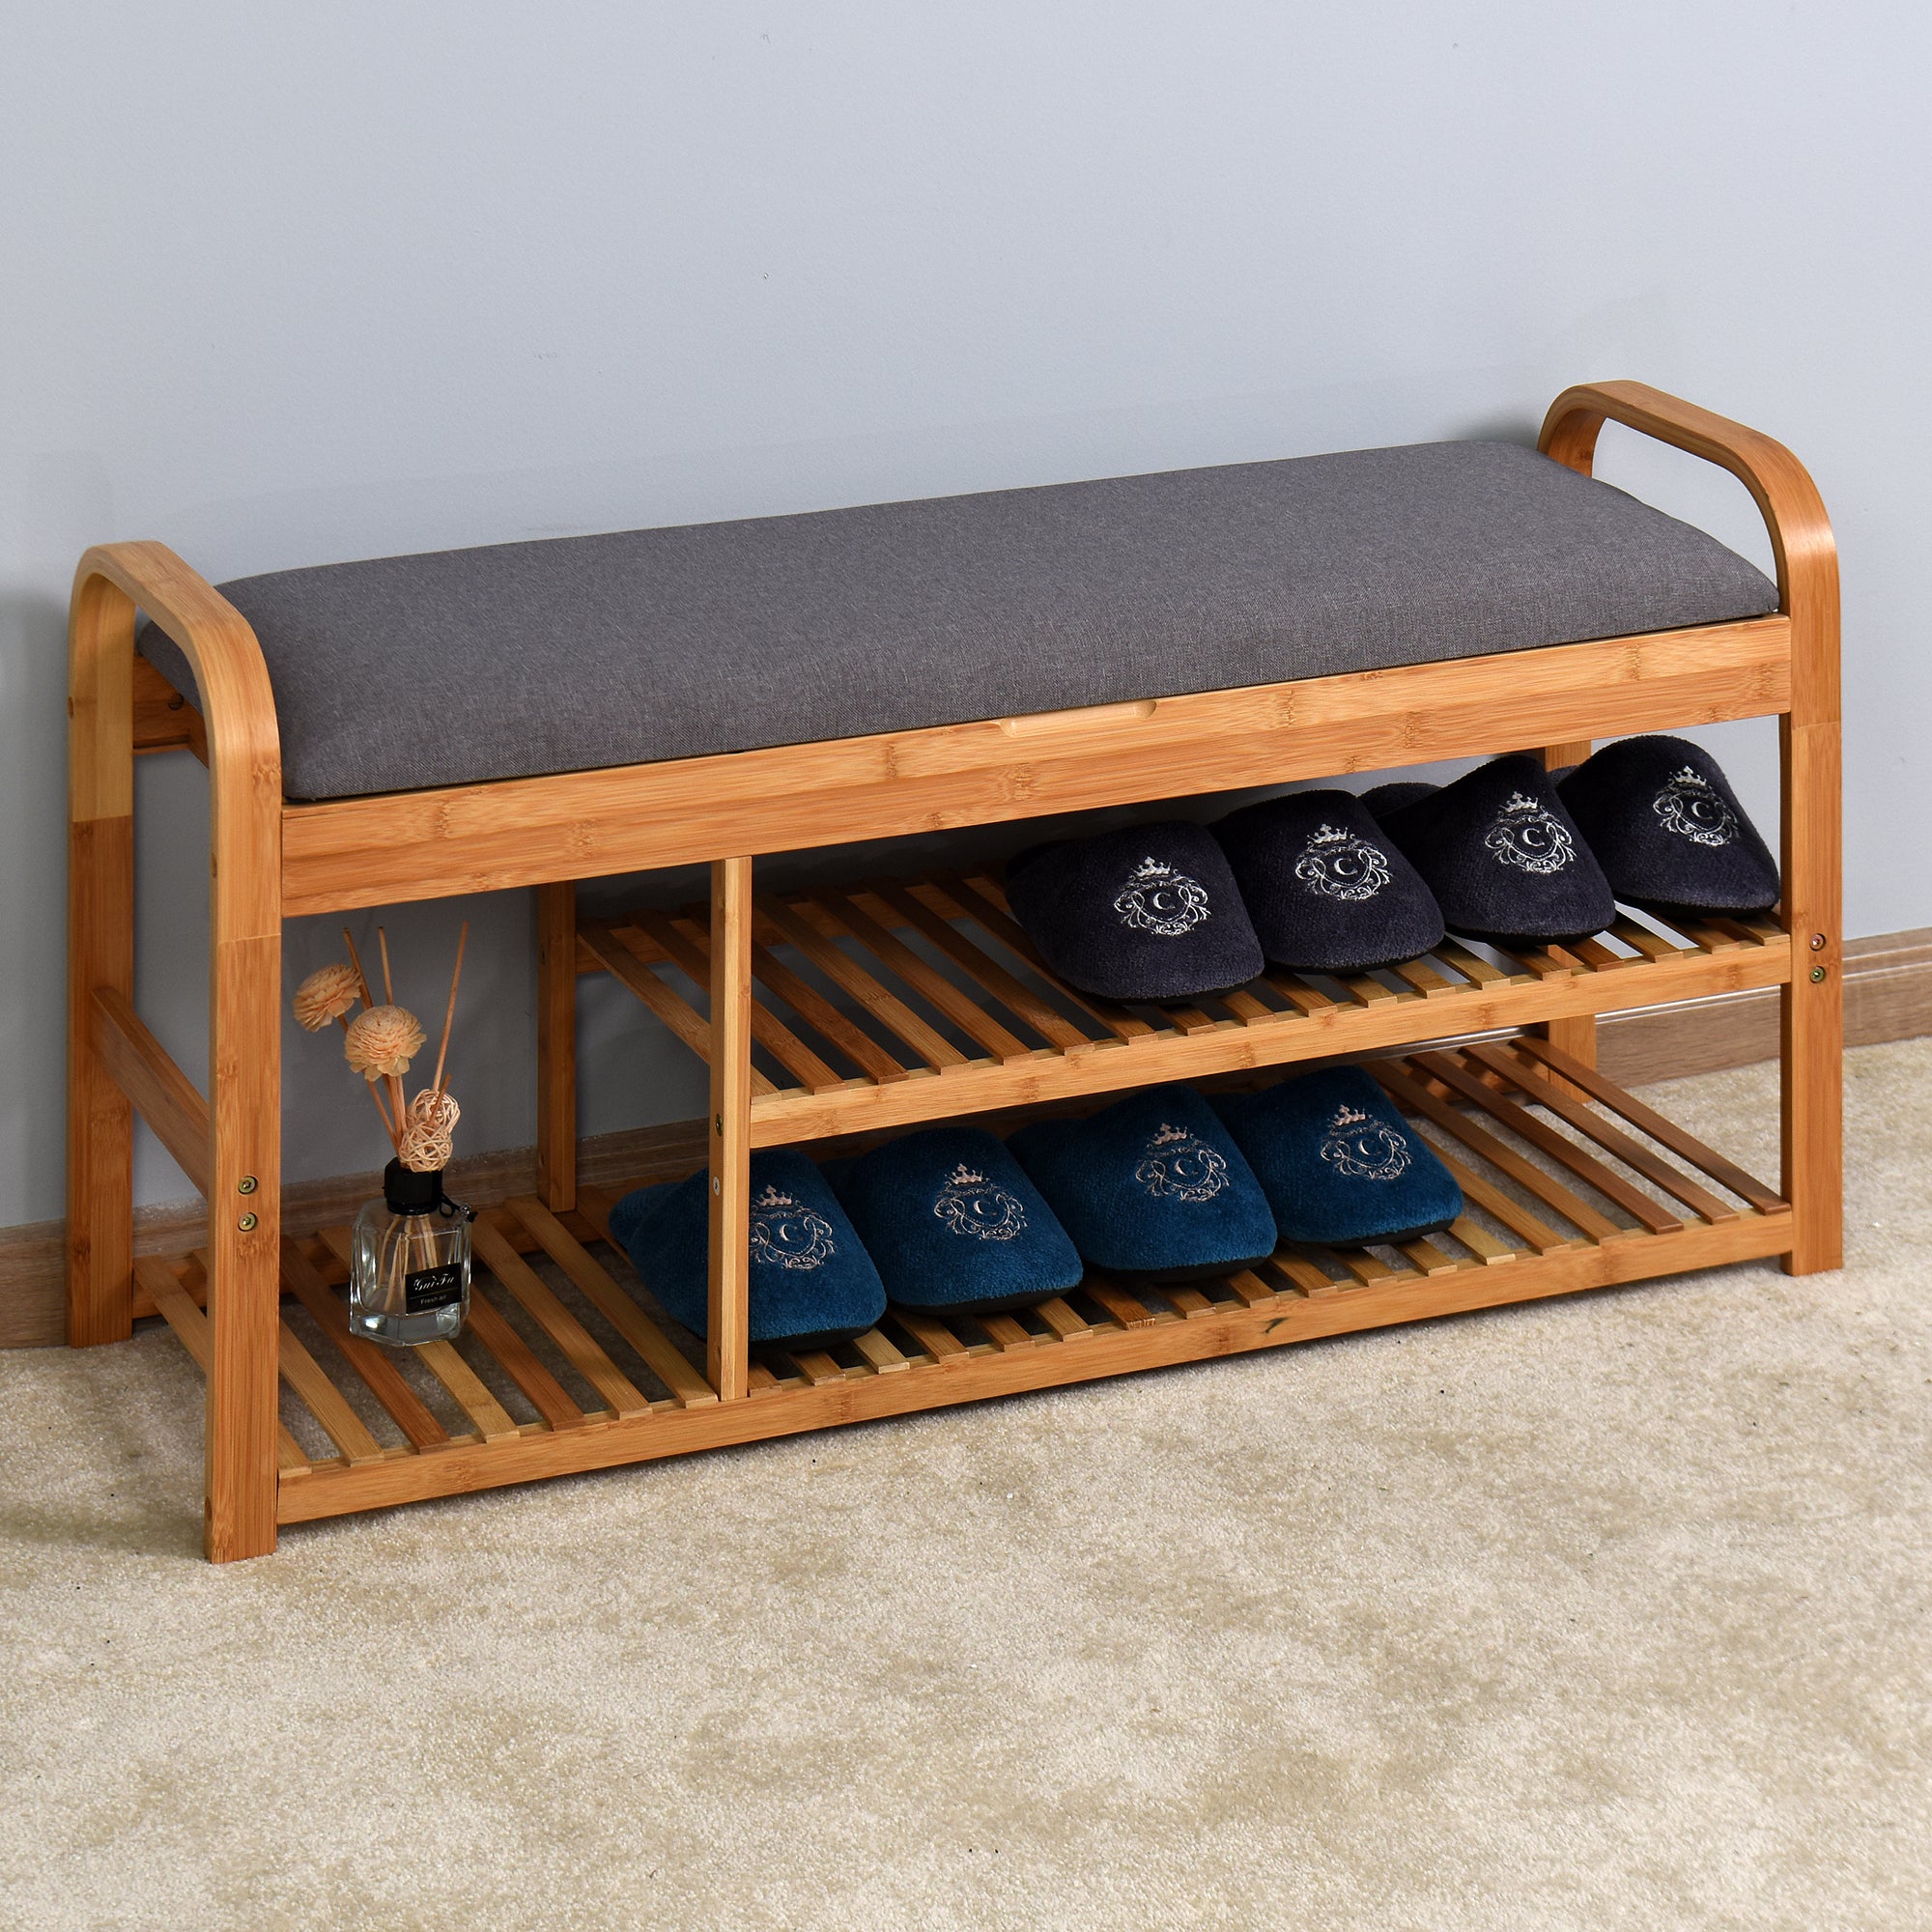 Living Room Bamboo Storage Bench， Entryway 3 Shelves Bench with flip storage compartment